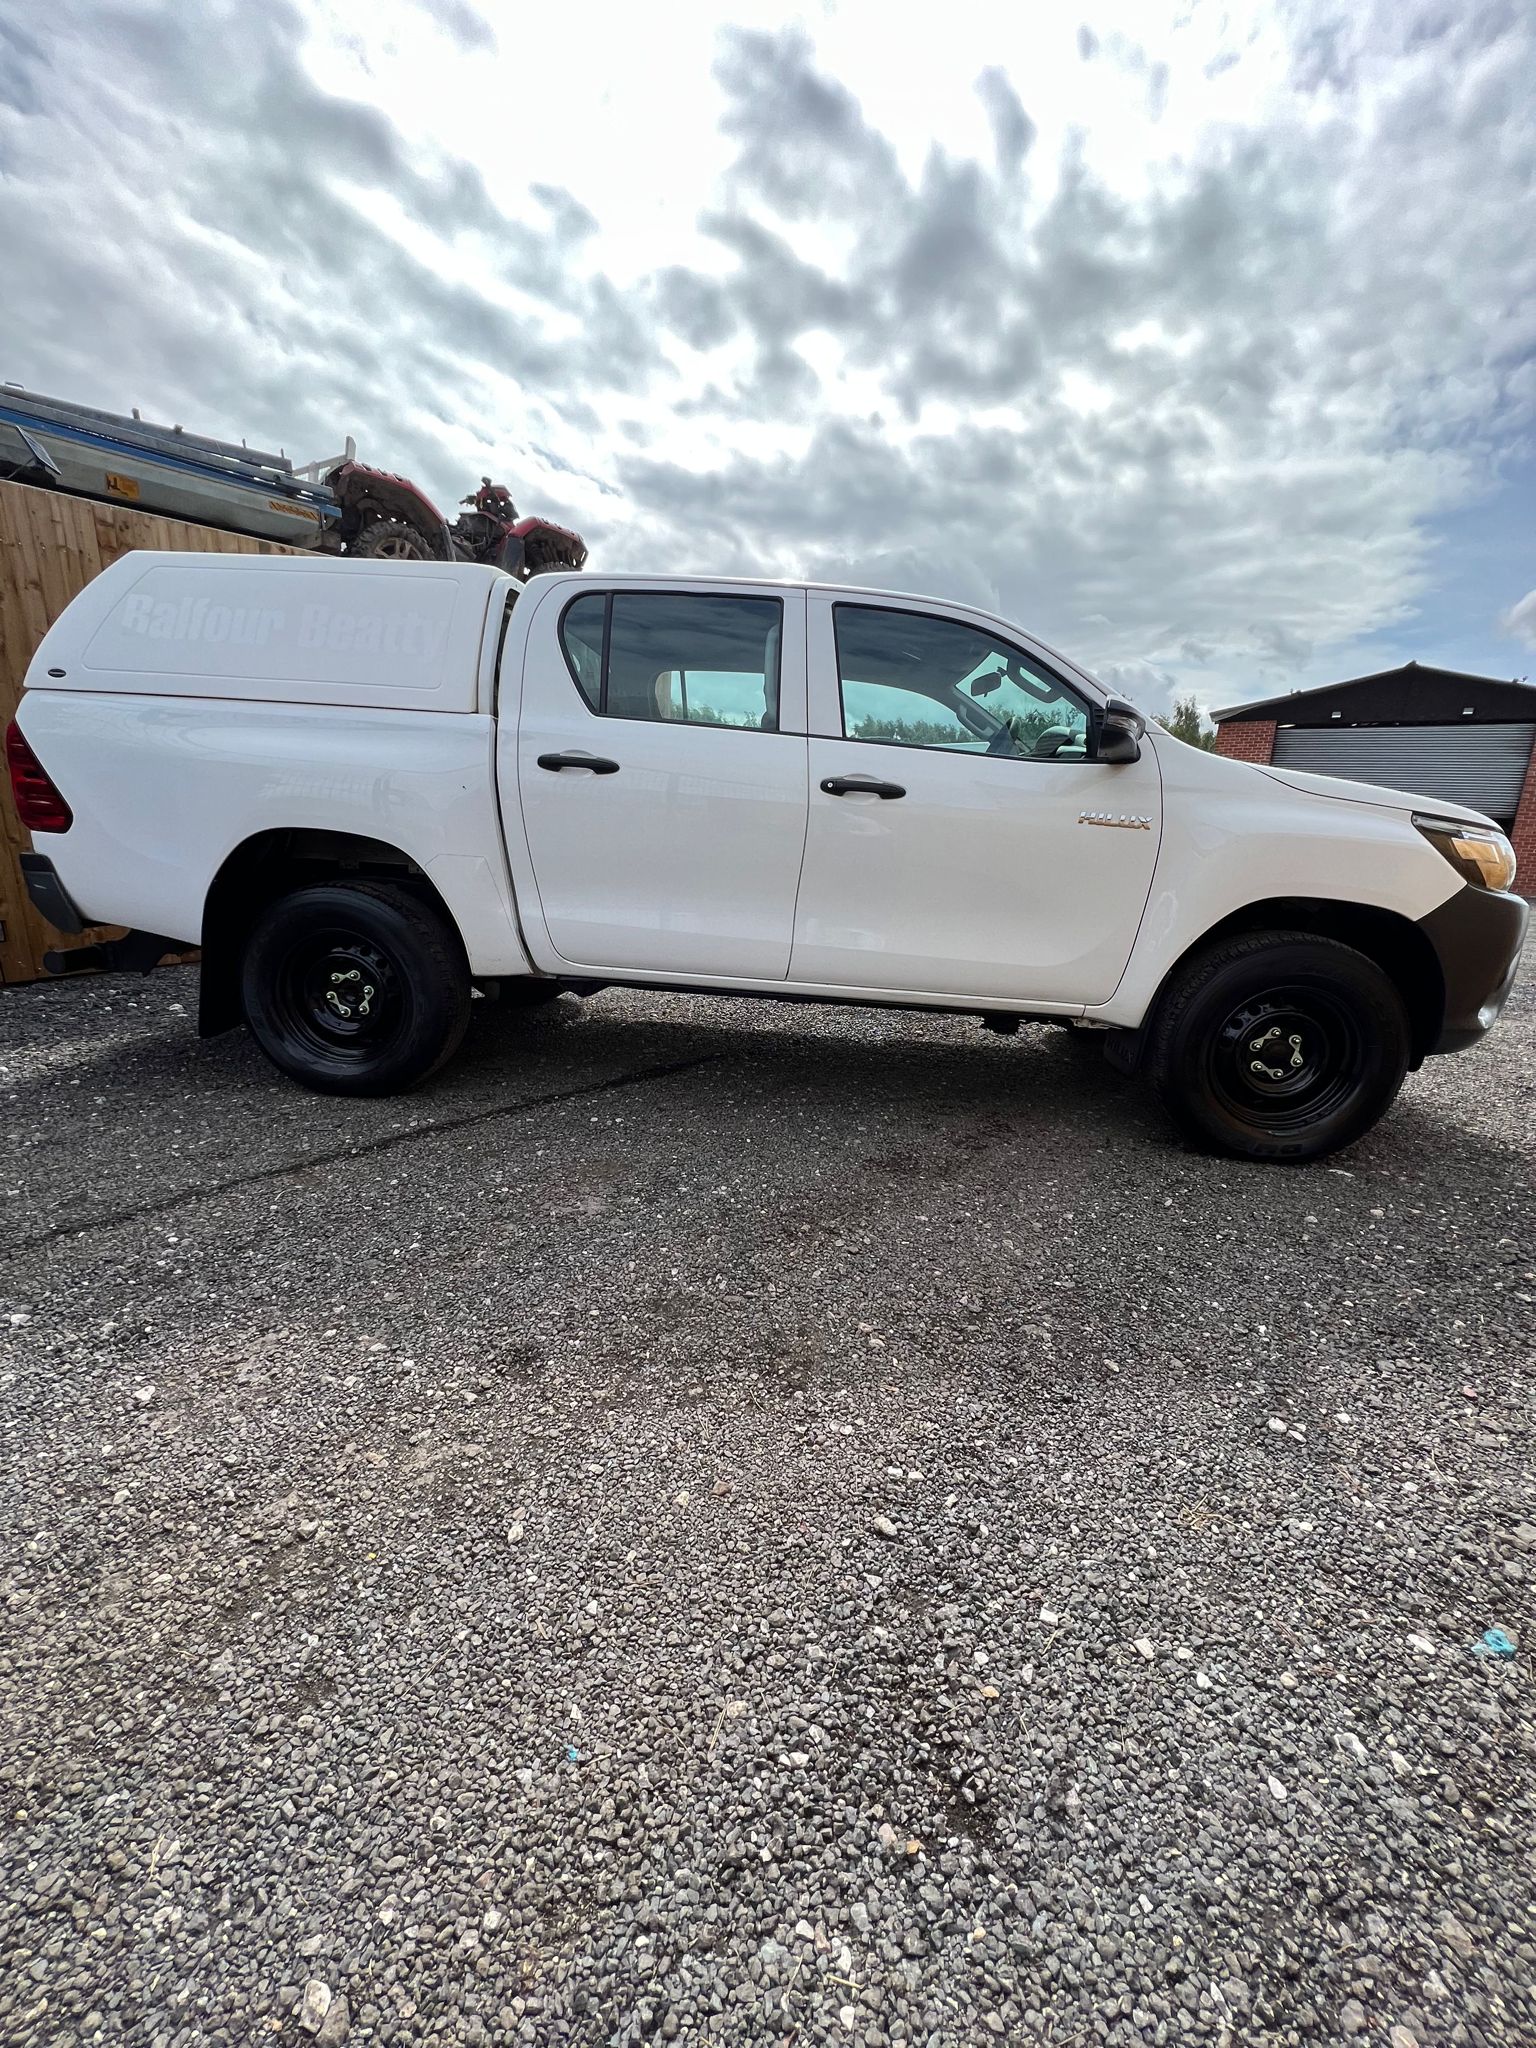 Bid on TOYOTA HILUX 2018 91K MILES 2 KEYS- Buy &amp; Sell on Auction with EAMA Group